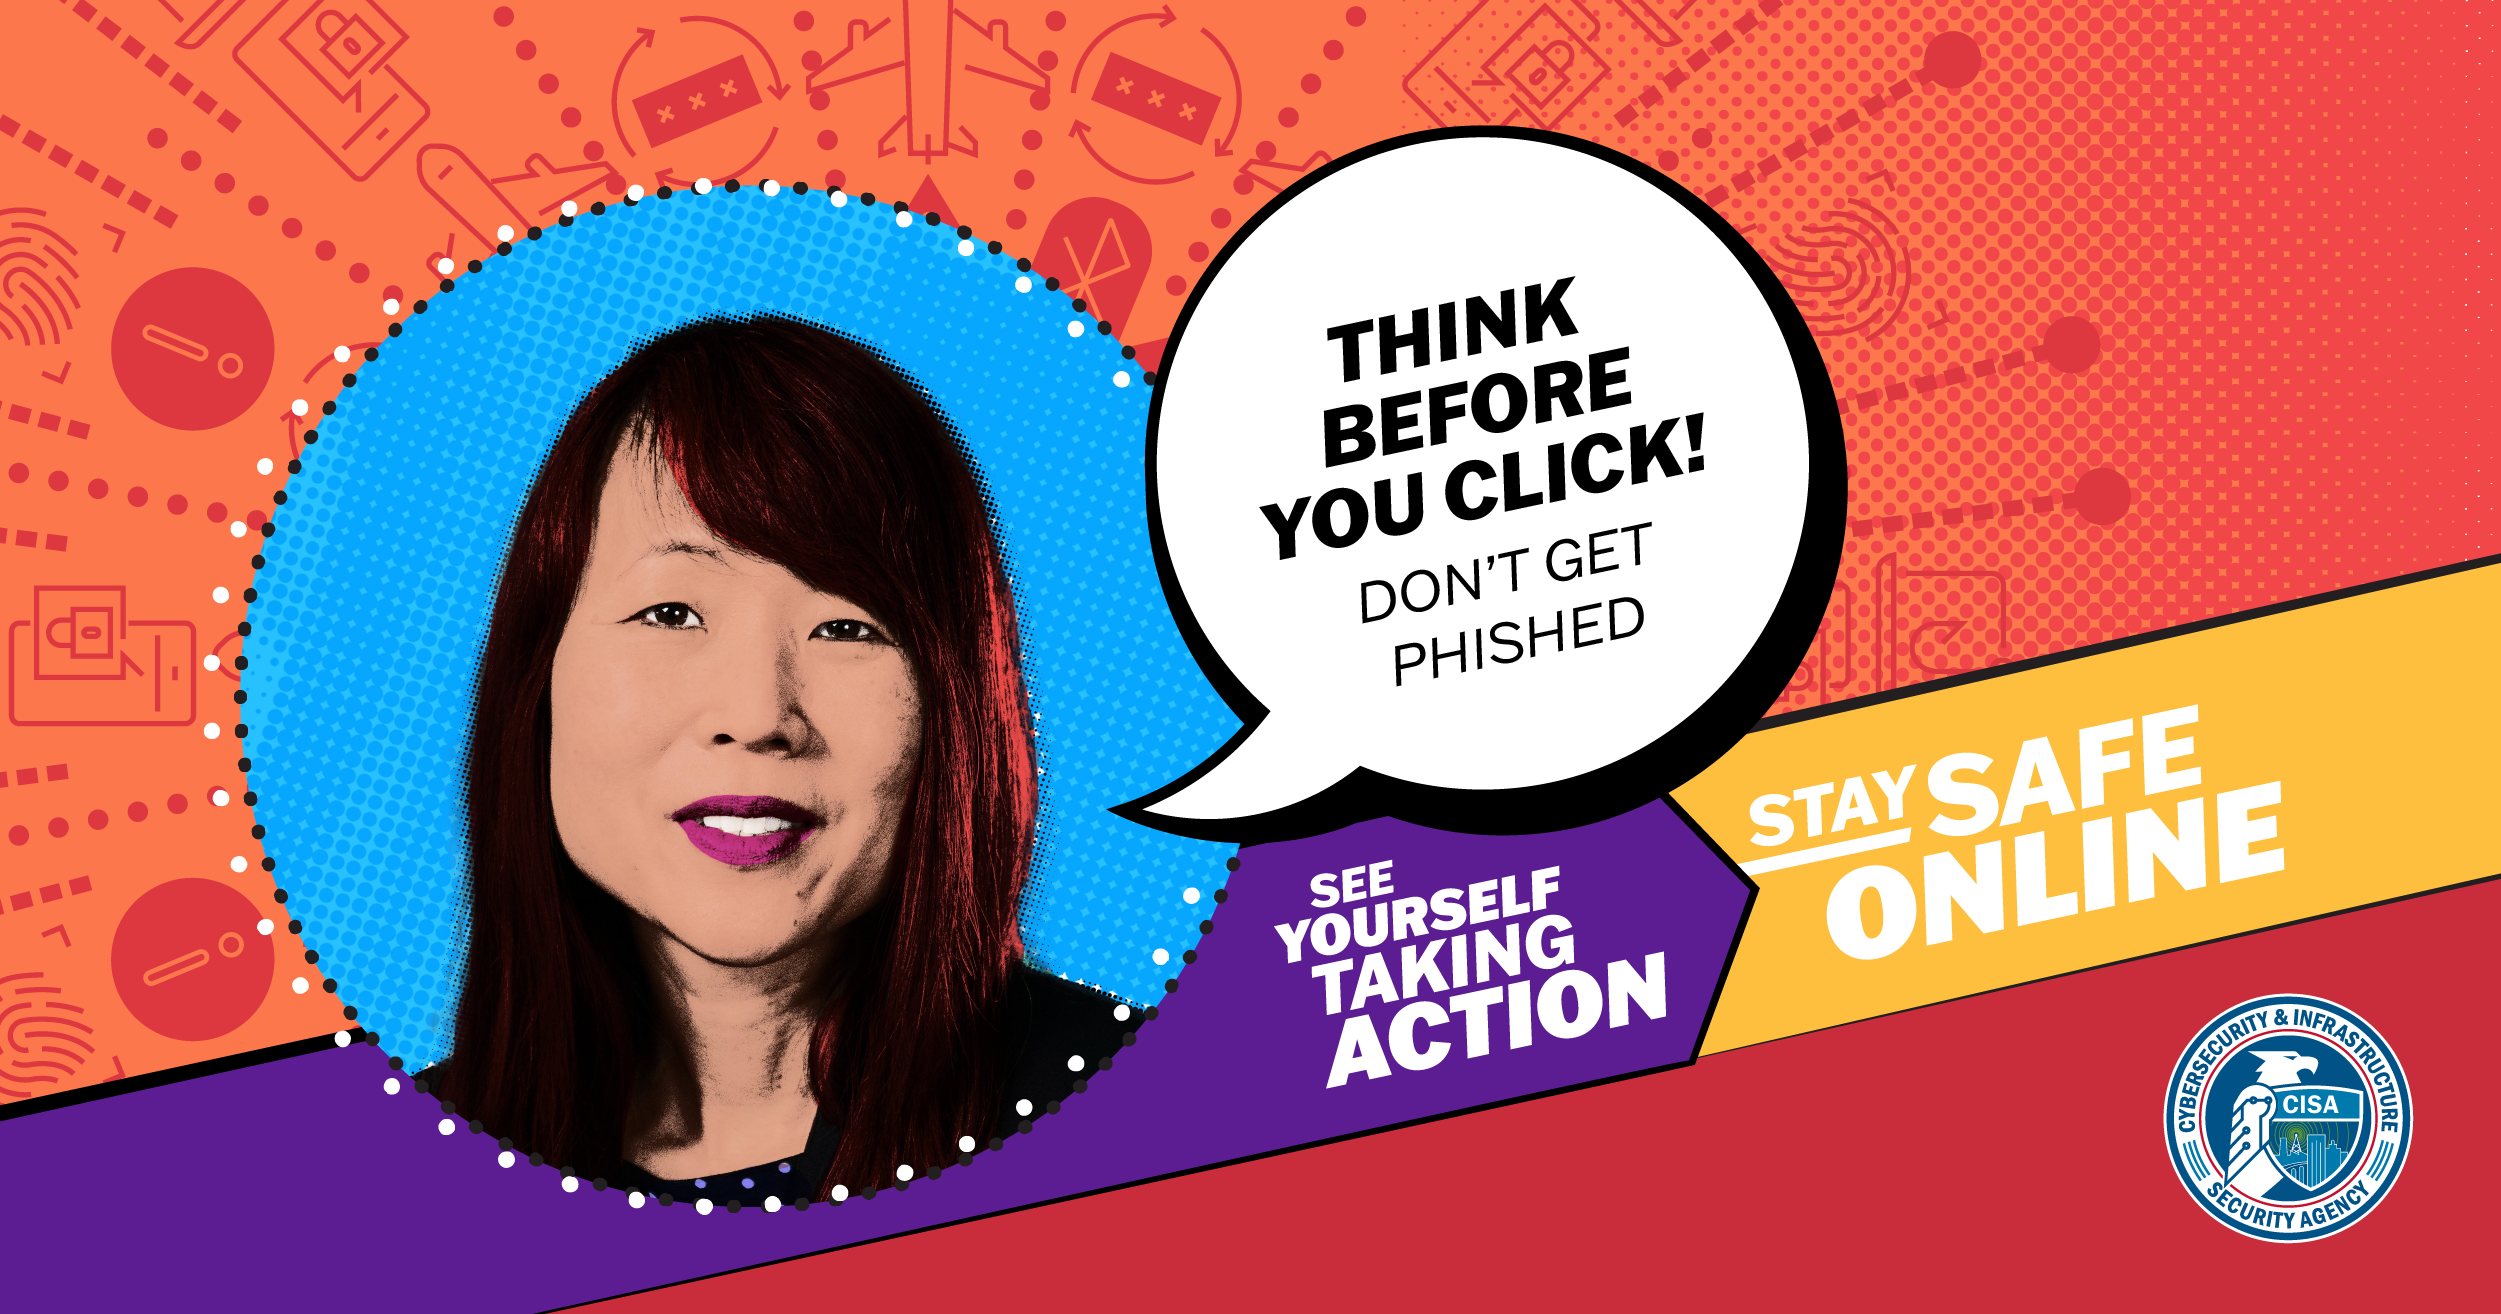 Think Before You Click - Don't Get Phished. See Yourself Taking Action. Stay Safe Online